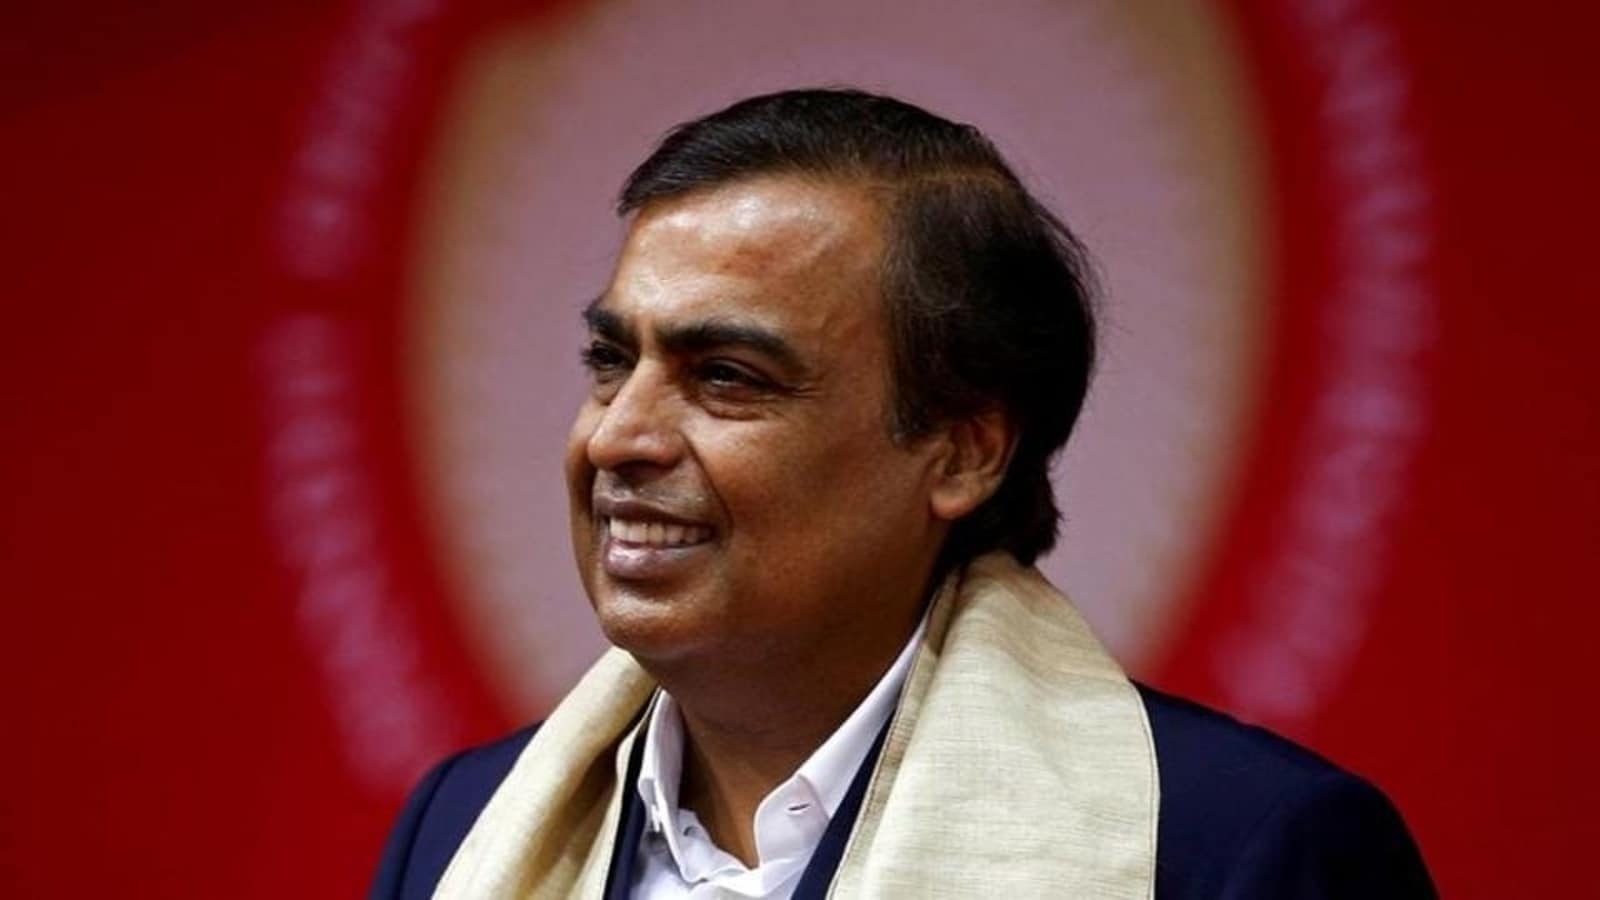 Forbes billionaire list: See who joins Ambani, Adani, Mittal as richest Indians